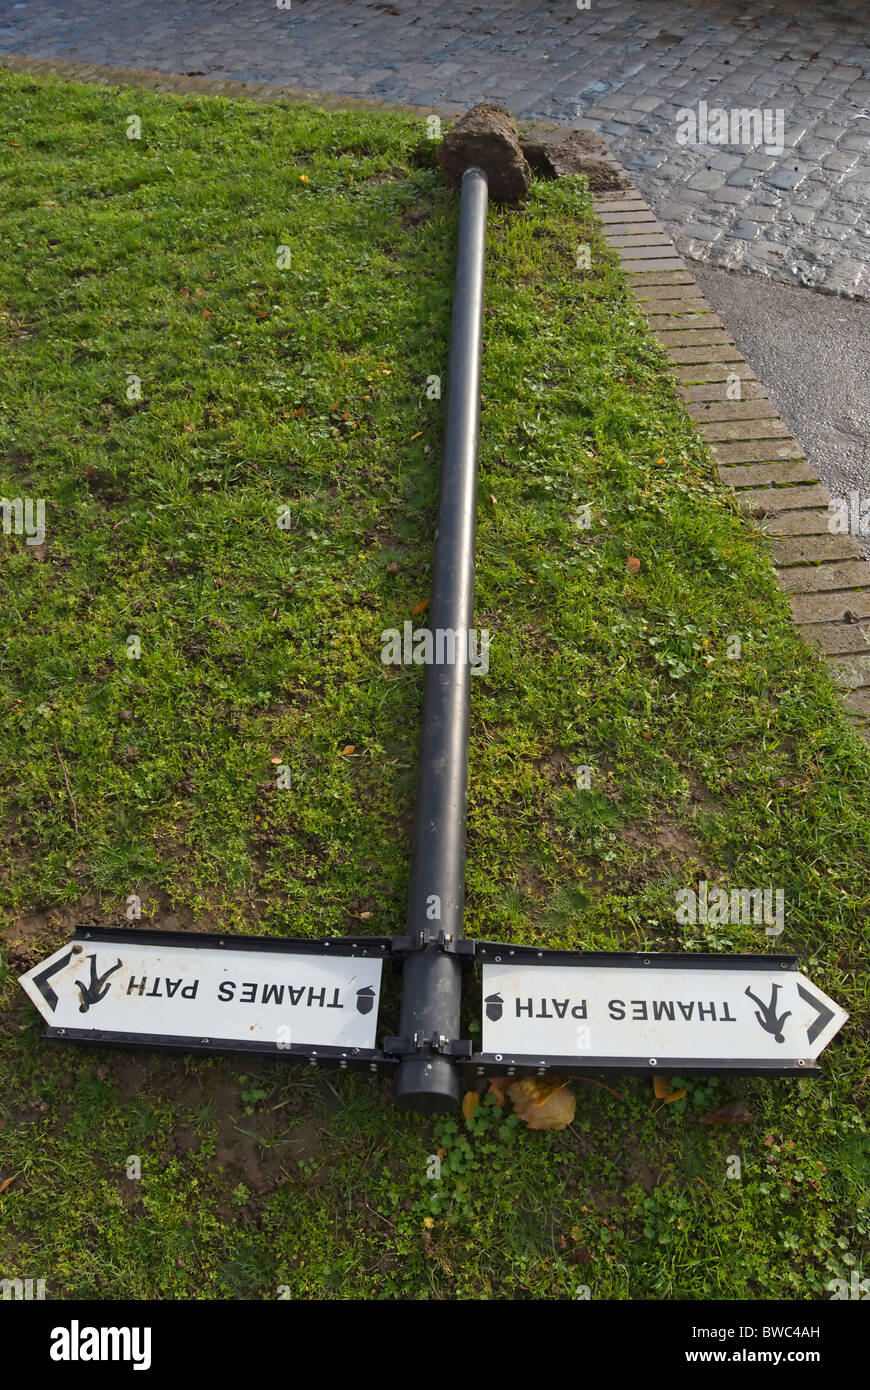 upended thames path signpost Stock Photo